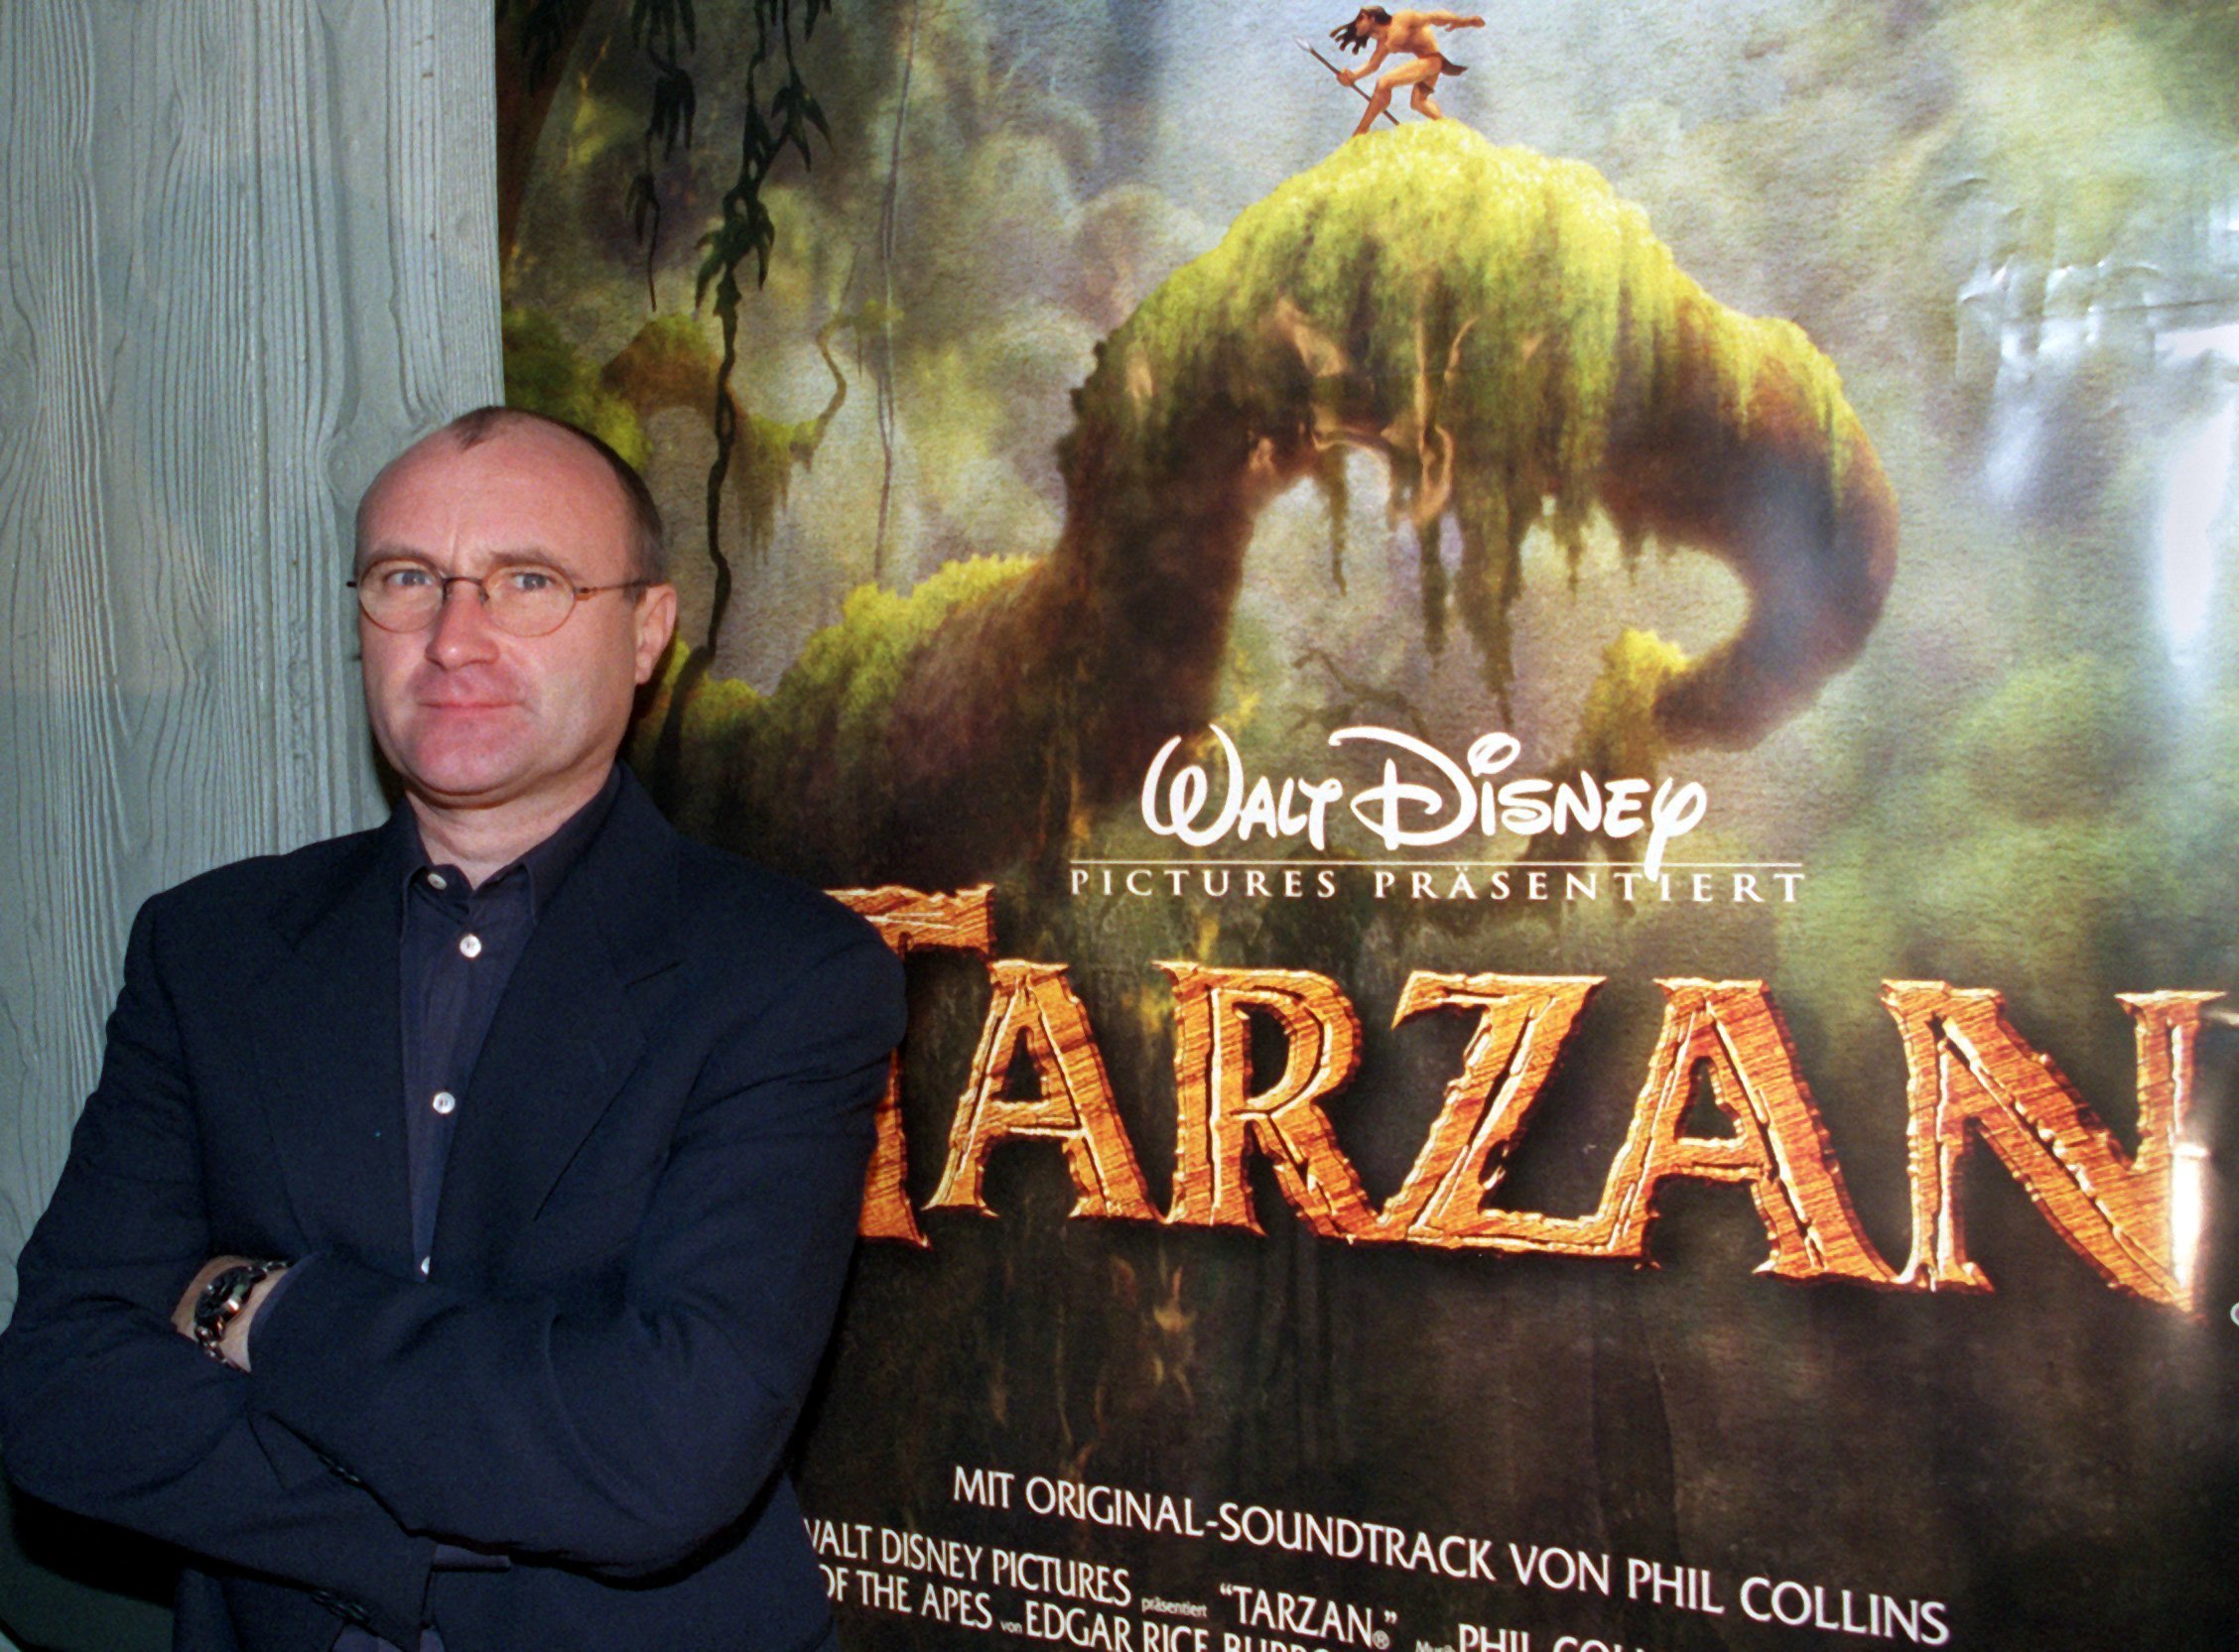 Phil Collins' Oscar-Winning Song Was Supposed to Be Performed by This ' Tarzan' Actor Who Couldn't 'Get It' Right